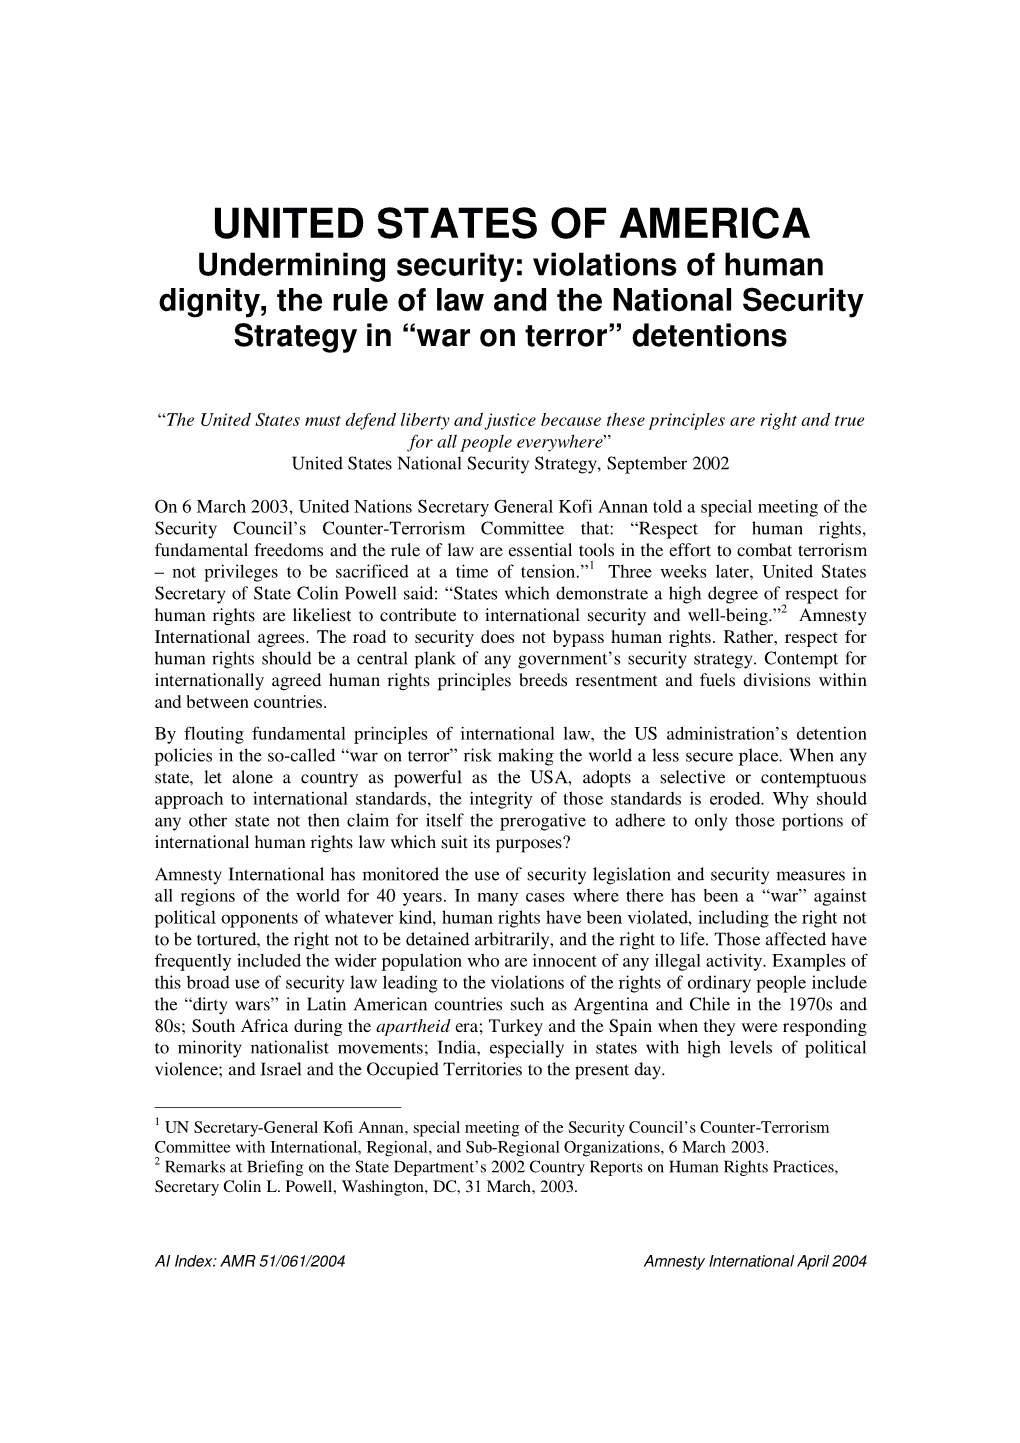 UNITED STATES of AMERICA Undermining Security: Violations of Human Dignity, the Rule of Law and the National Security Strategy in “War on Terror” Detentions